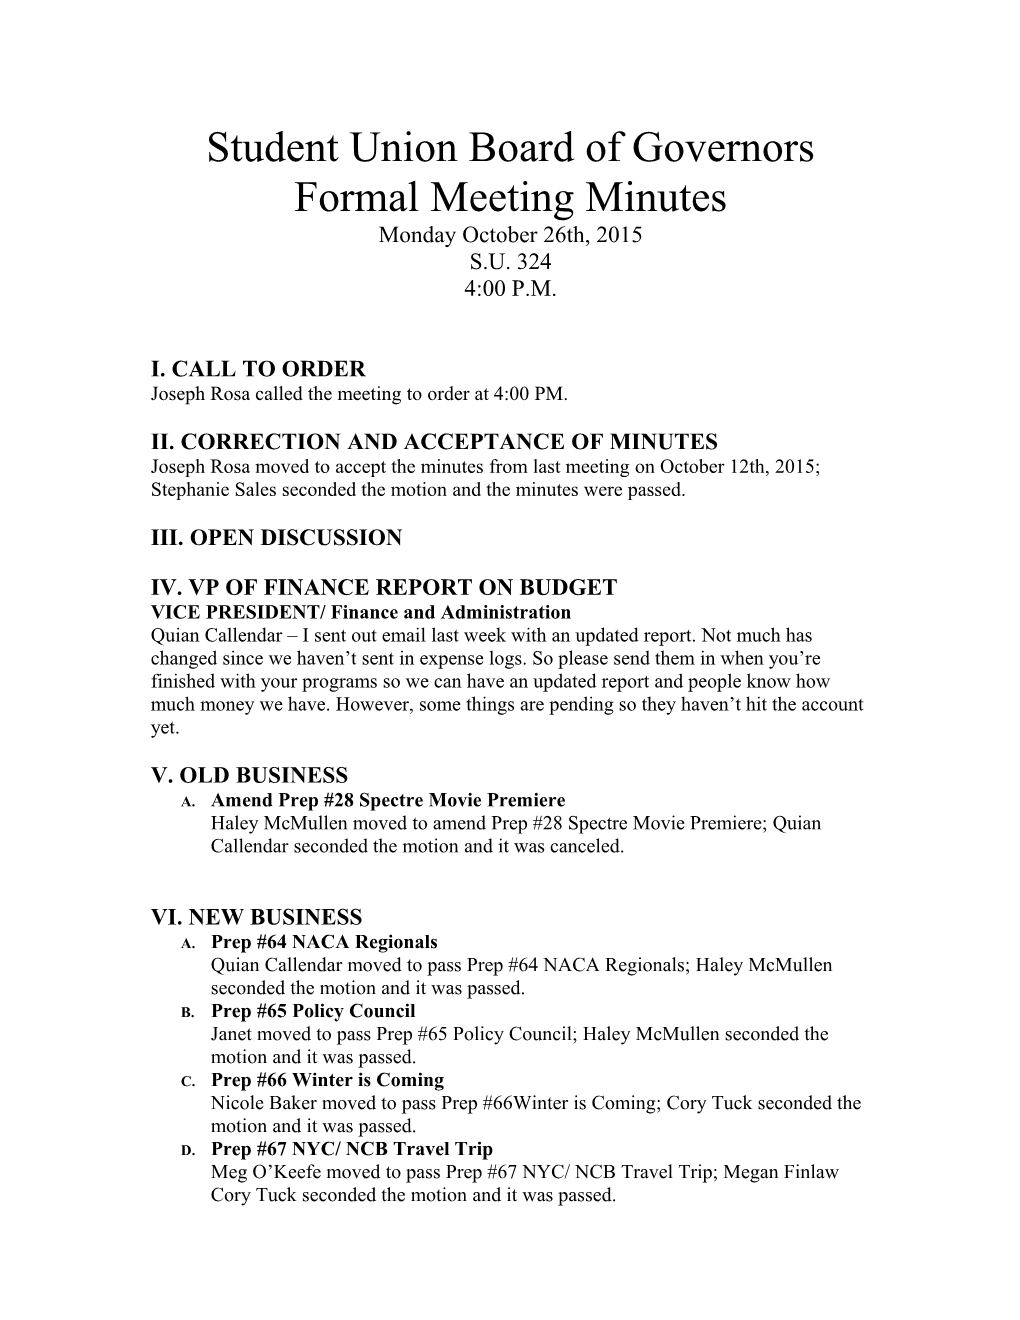 Student Union Board of Governors Formal Meeting Minutes